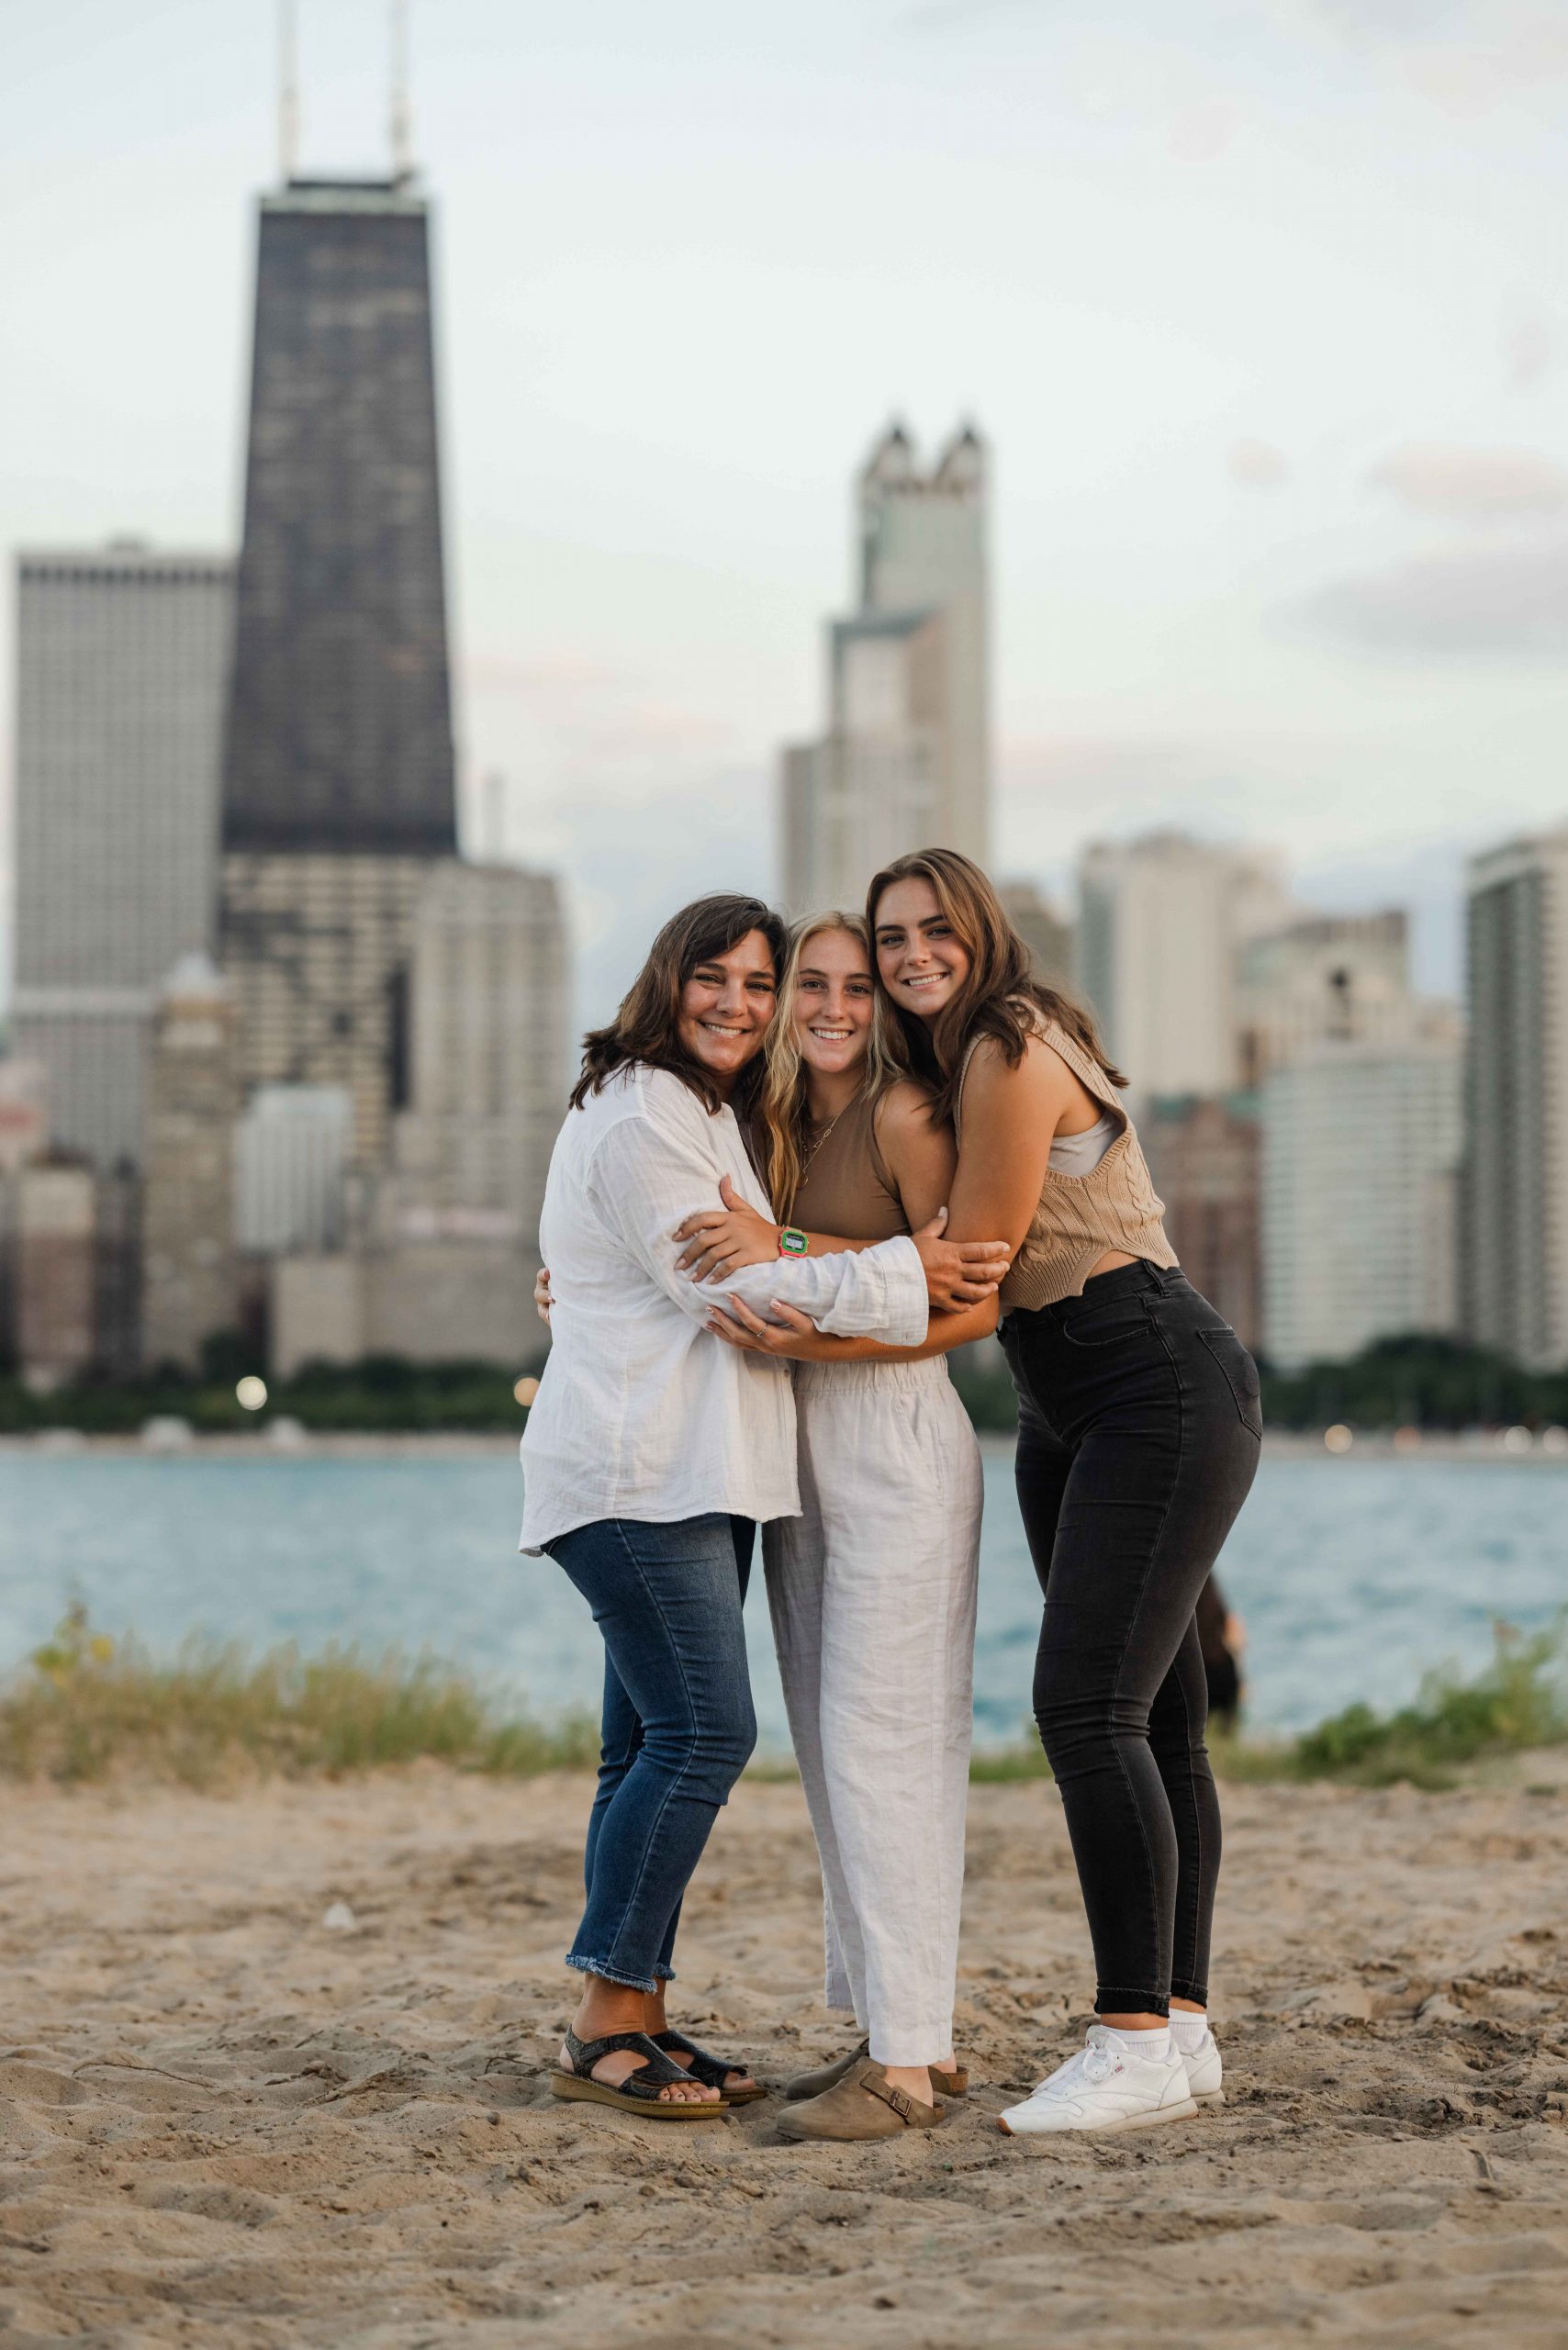 Mom and sister Senior Photoshoot with Chicago Skyline by Chicago Photographer-31